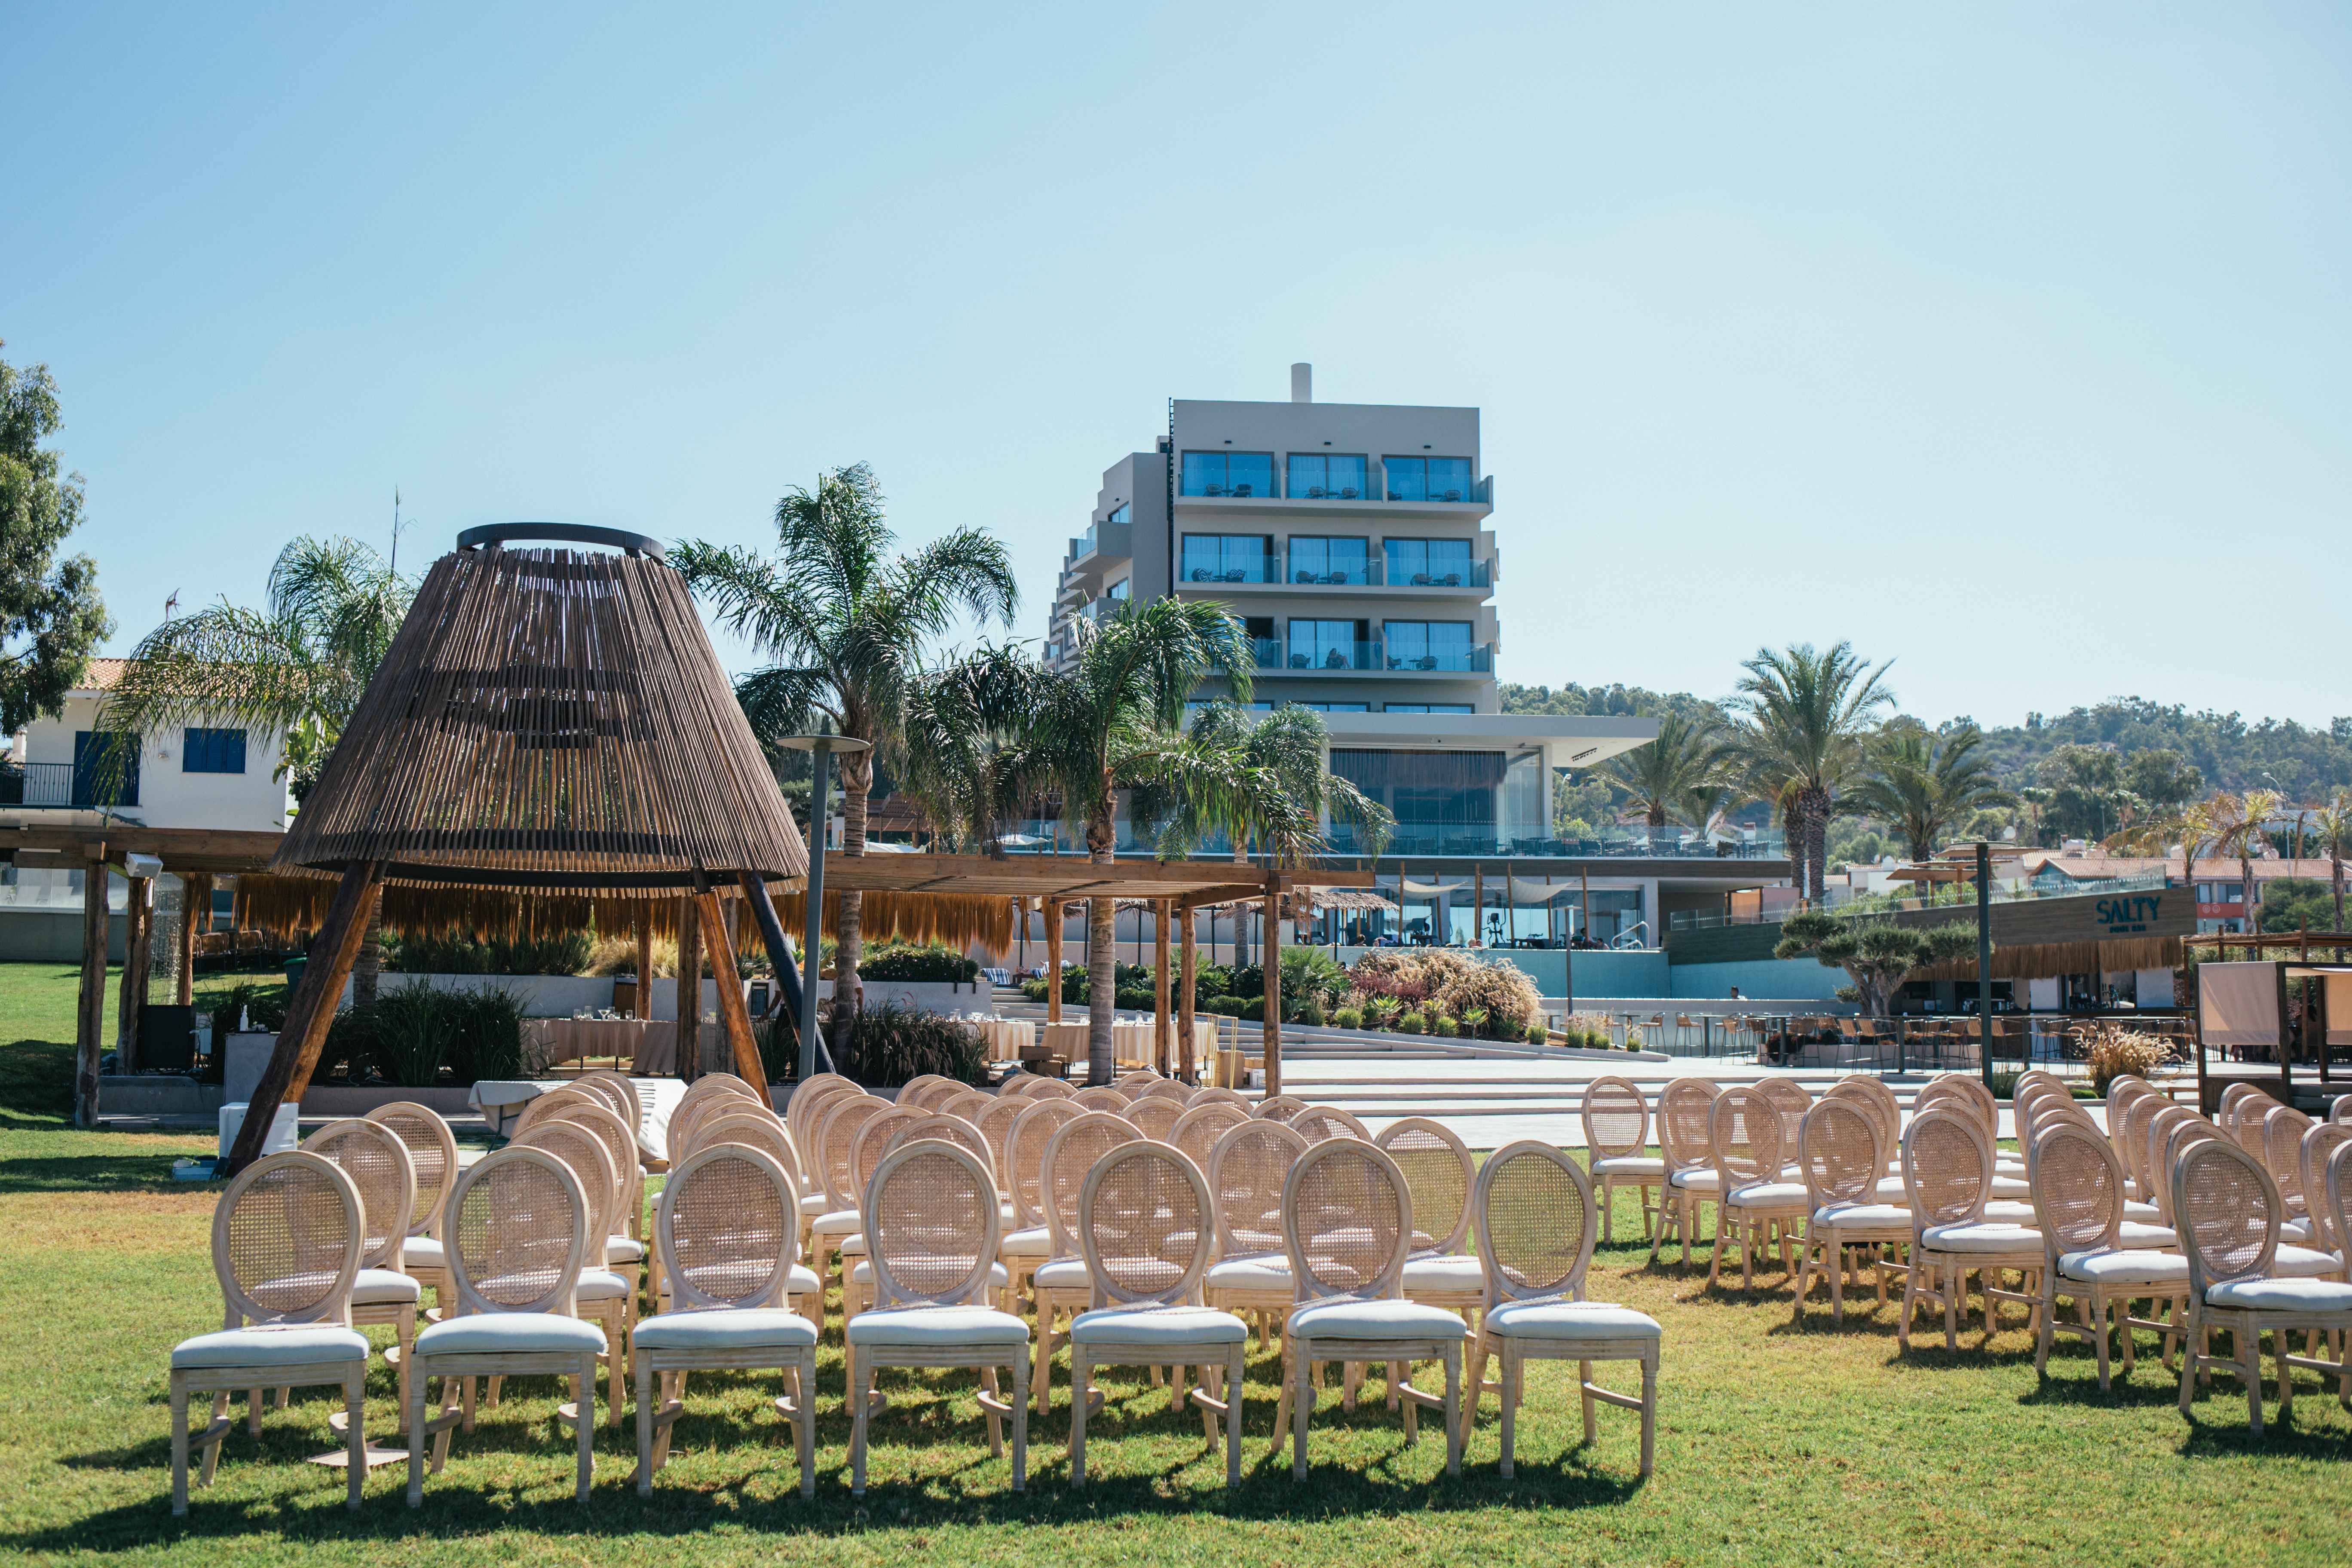 Book your wedding day in Cavo Zoe Hotel